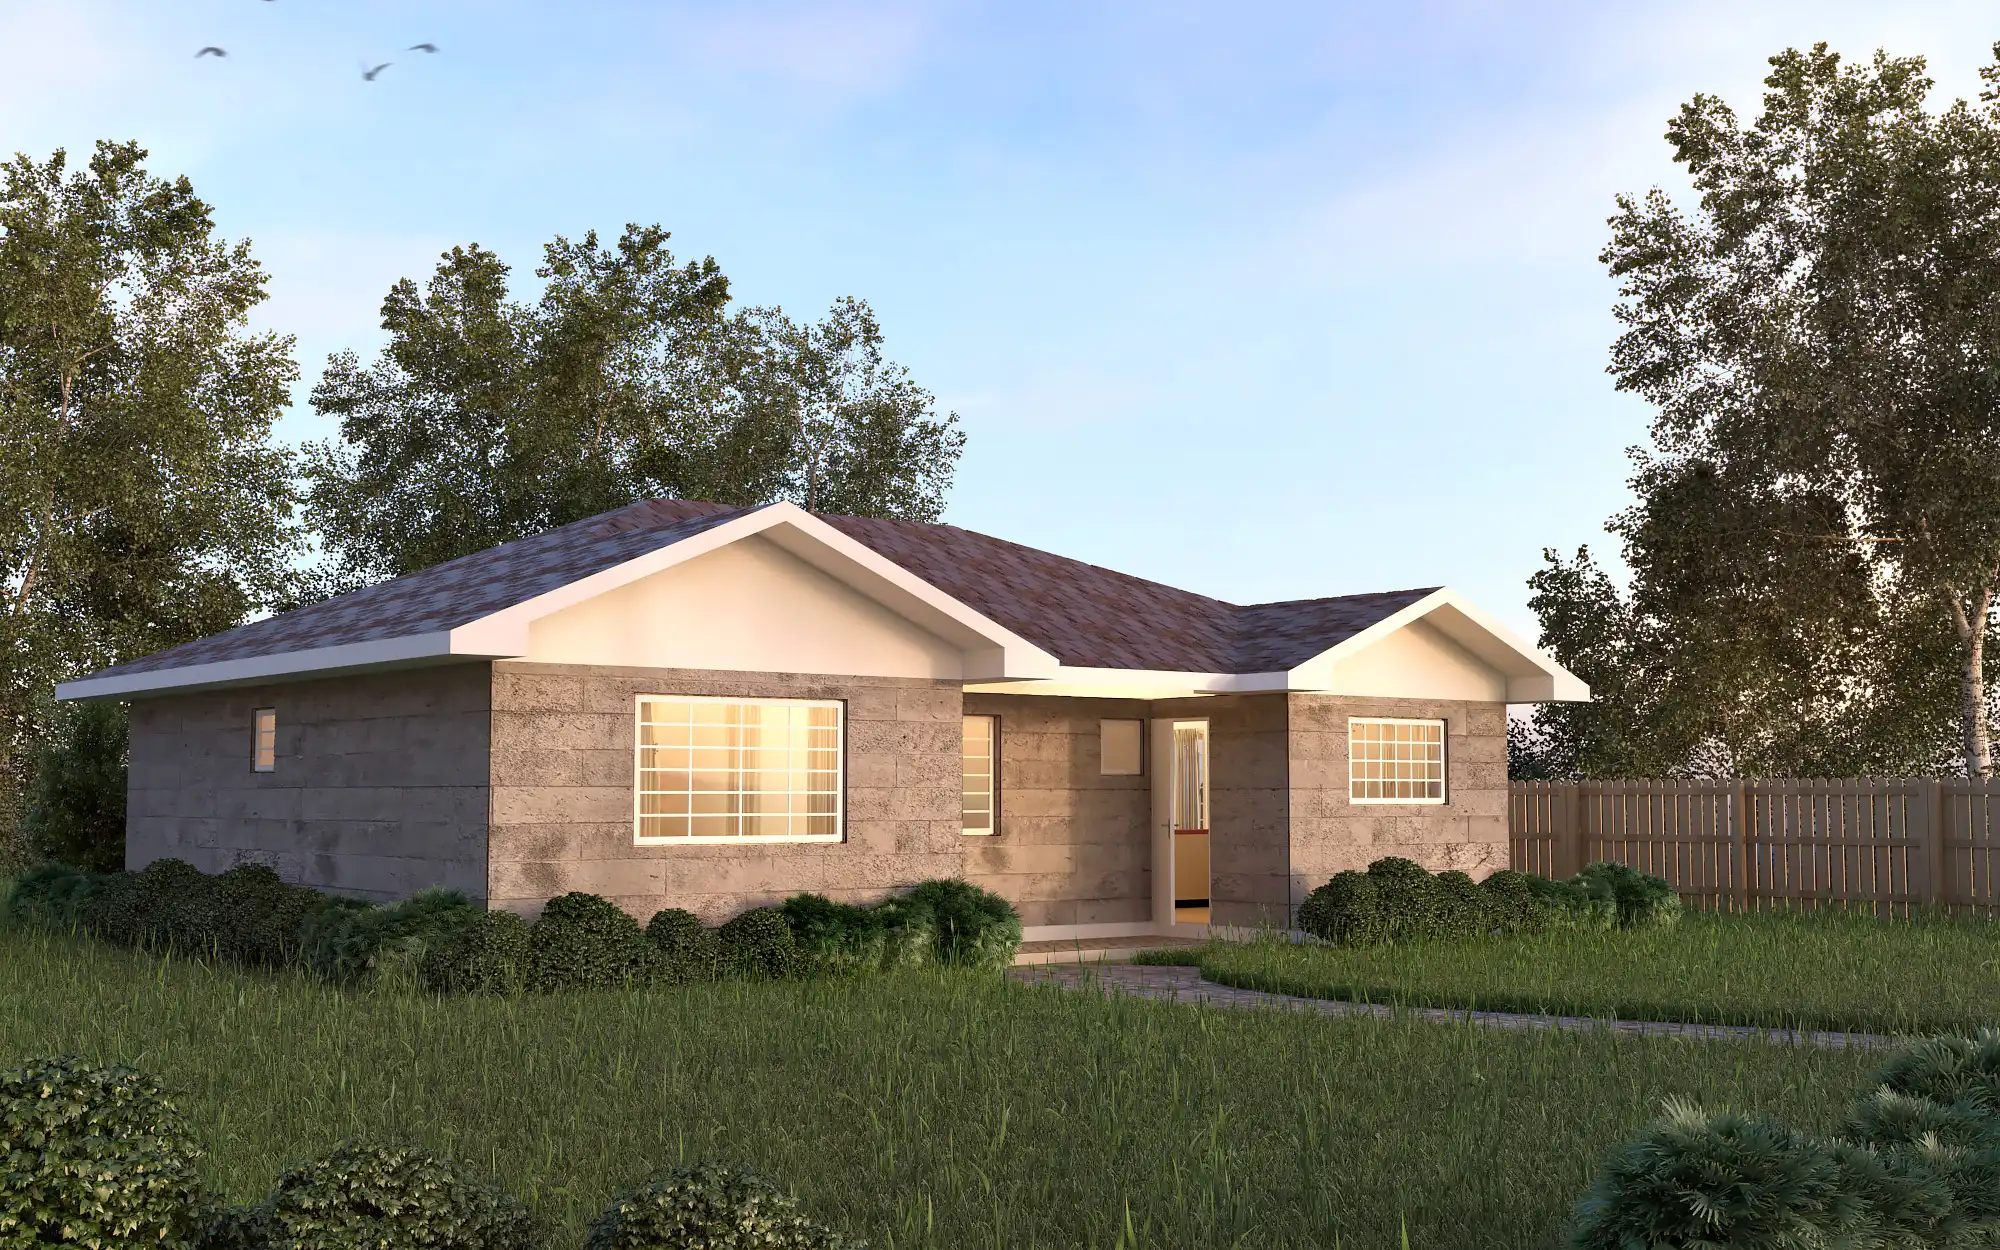 3 Bedroom Bungalow - ID 3162 - 3 BED BNGL TP6 OP1 REAR.jpg from Inuua Tujenge house plans with 3 bedrooms and 2 bathrooms. ( bungalow )